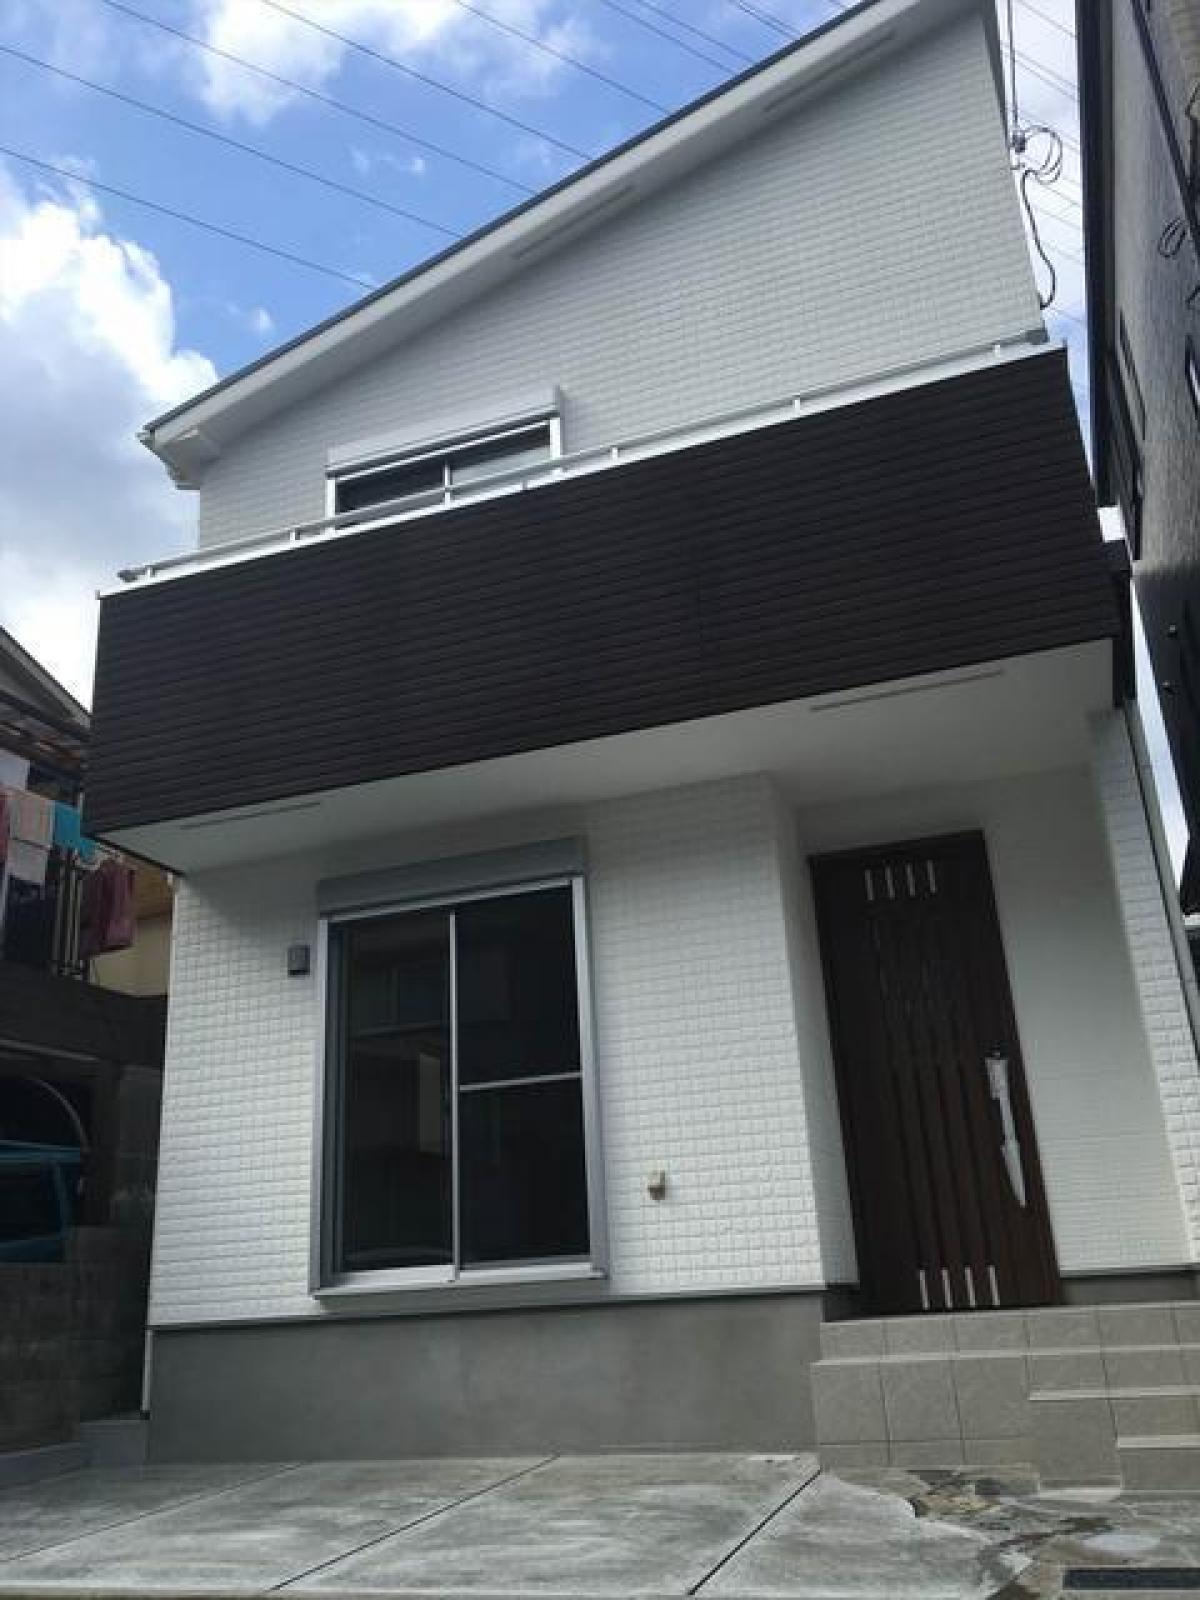 Picture of Home For Sale in Takatsuki Shi, Osaka, Japan